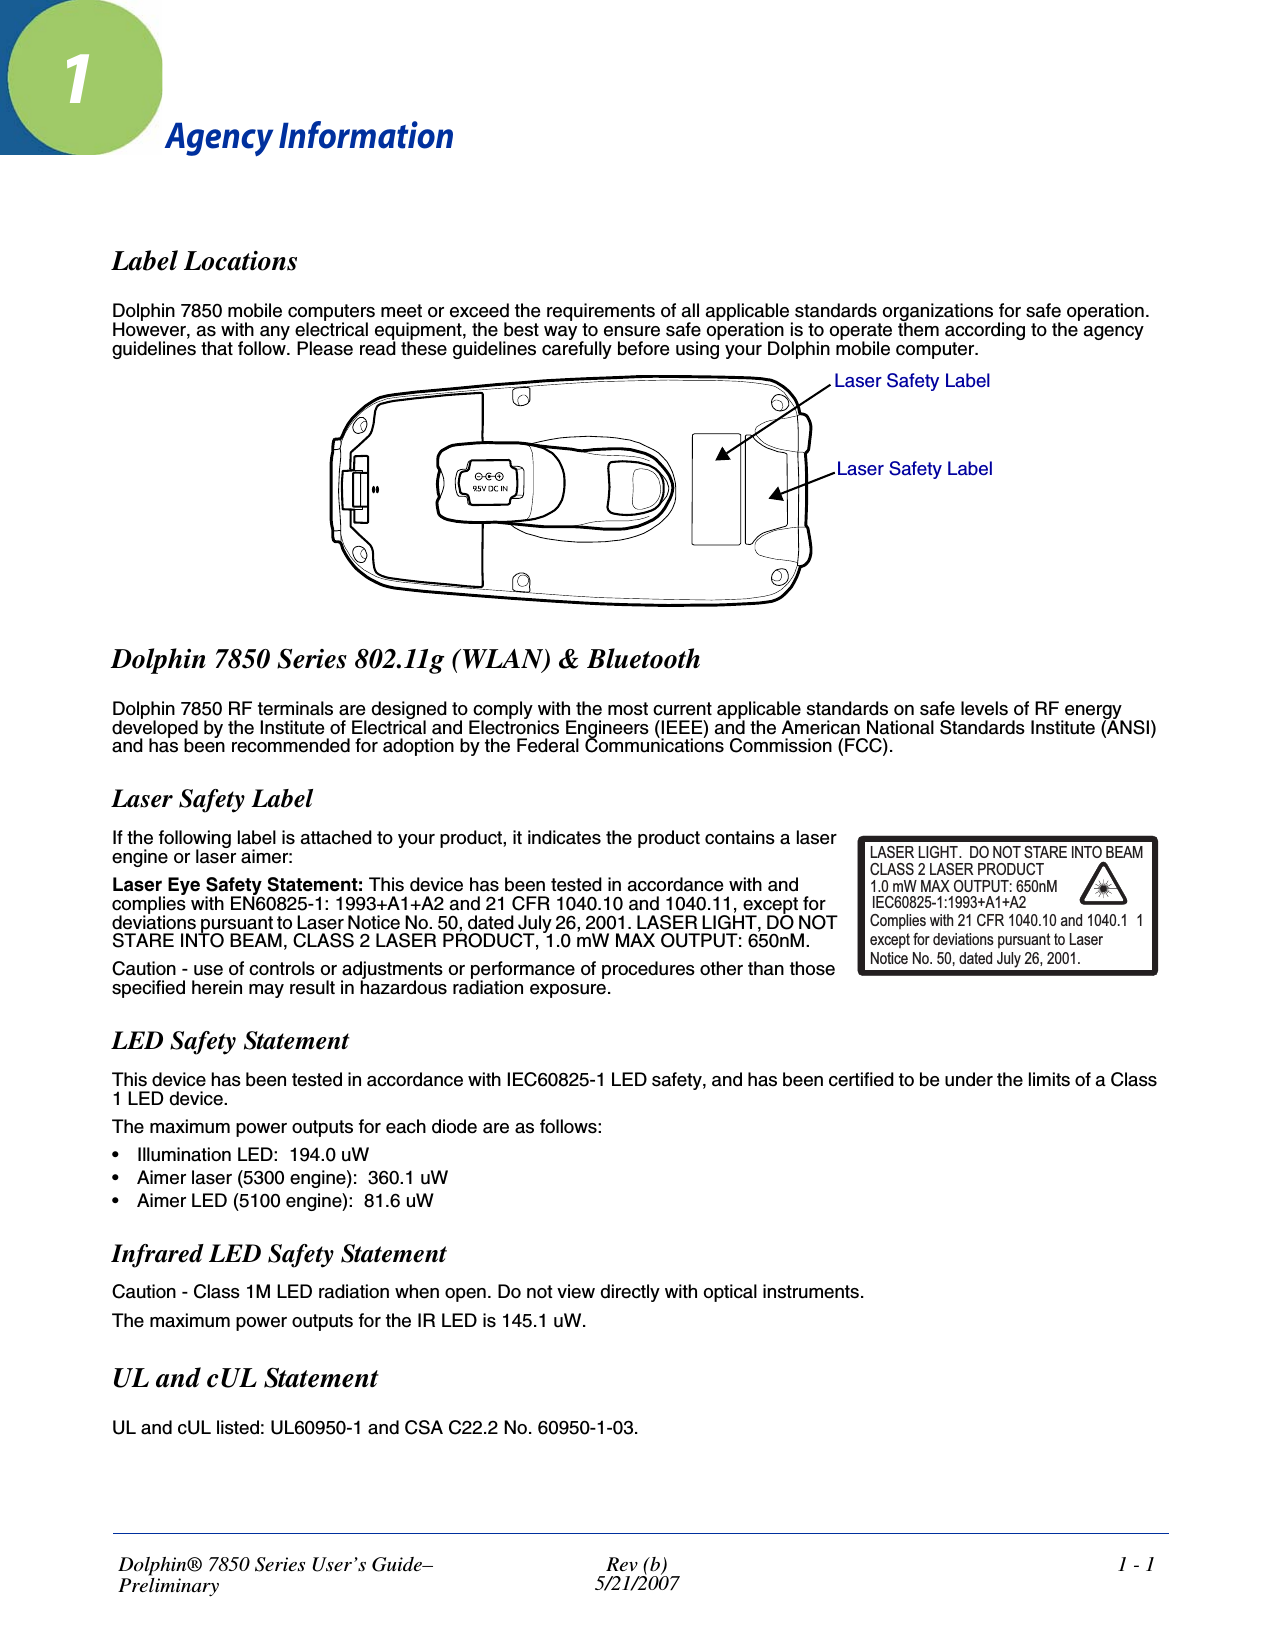 Dolphin® 7850 Series User’s Guide–Preliminary Rev (b)5/21/20071 - 11Agency InformationLabel LocationsDolphin 7850 mobile computers meet or exceed the requirements of all applicable standards organizations for safe operation. However, as with any electrical equipment, the best way to ensure safe operation is to operate them according to the agency guidelines that follow. Please read these guidelines carefully before using your Dolphin mobile computer. Dolphin 7850 Series 802.11g (WLAN) &amp; BluetoothDolphin 7850 RF terminals are designed to comply with the most current applicable standards on safe levels of RF energy developed by the Institute of Electrical and Electronics Engineers (IEEE) and the American National Standards Institute (ANSI) and has been recommended for adoption by the Federal Communications Commission (FCC). Laser Safety LabelIf the following label is attached to your product, it indicates the product contains a laser engine or laser aimer: Laser Eye Safety Statement: This device has been tested in accordance with and complies with EN60825-1: 1993+A1+A2 and 21 CFR 1040.10 and 1040.11, except for deviations pursuant to Laser Notice No. 50, dated July 26, 2001. LASER LIGHT, DO NOT STARE INTO BEAM, CLASS 2 LASER PRODUCT, 1.0 mW MAX OUTPUT: 650nM. Caution - use of controls or adjustments or performance of procedures other than those specified herein may result in hazardous radiation exposure.LED Safety StatementThis device has been tested in accordance with IEC60825-1 LED safety, and has been certified to be under the limits of a Class 1 LED device.The maximum power outputs for each diode are as follows:• Illumination LED:  194.0 uW• Aimer laser (5300 engine):  360.1 uW• Aimer LED (5100 engine):  81.6 uWInfrared LED Safety StatementCaution - Class 1M LED radiation when open. Do not view directly with optical instruments. The maximum power outputs for the IR LED is 145.1 uW.UL and cUL StatementUL and cUL listed: UL60950-1 and CSA C22.2 No. 60950-1-03.Laser Safety LabelLaser Safety LabelLASER LIGHT. DO NOT STARE INTO BEAM1.0 mW MAX OUTPUT: 650nMIEC60825-1:1993+A1+A2CLASS 2 LASER PRODUCTComplies with 21 CFR 1040.10 and 1040.1 1except for deviations pursuant to Laser Notice No. 50, dated July 26, 2001.